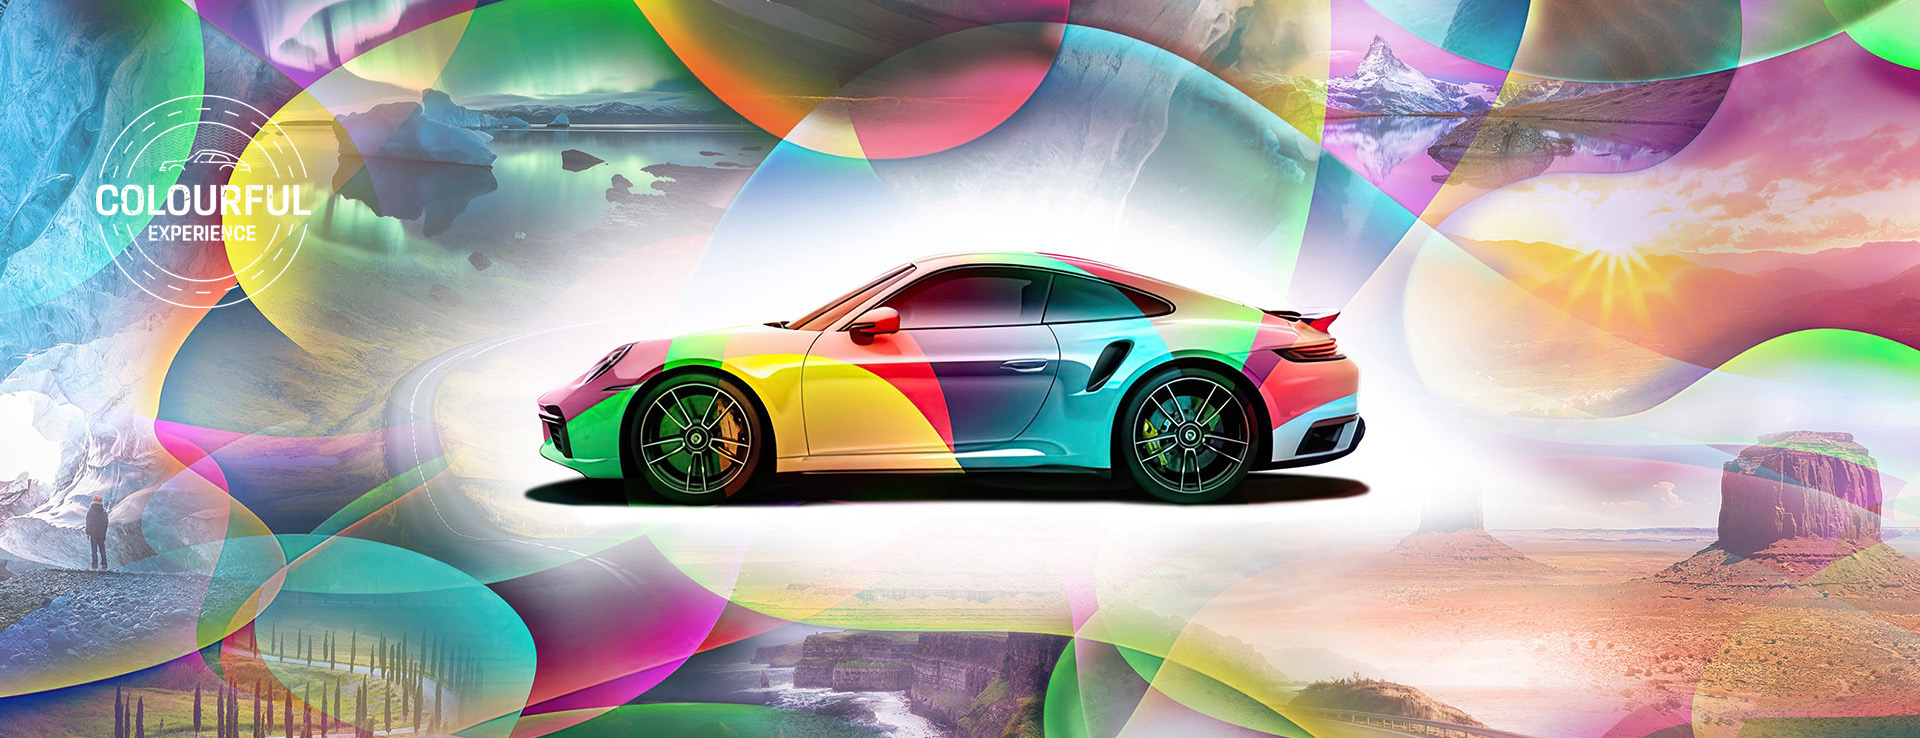 Porsche 911 in front of colourful collage of landscapes